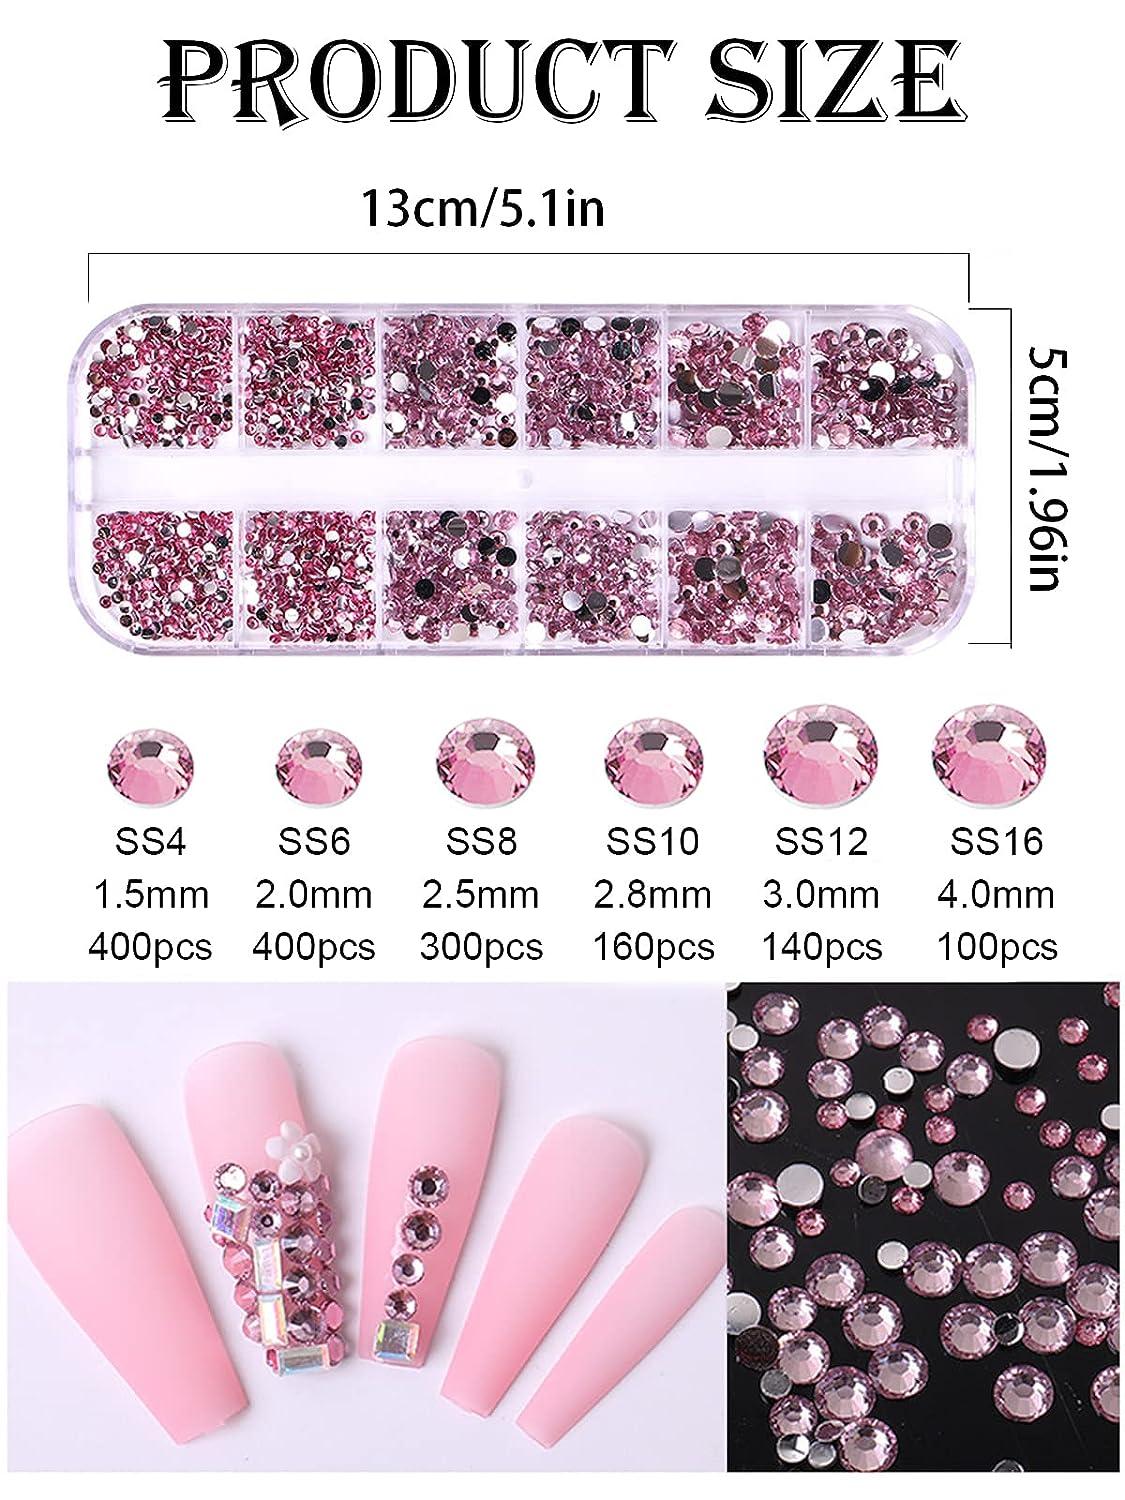 Bright Creations 16000 Pieces Of Flat Back Pearl Nail Gems For Diy